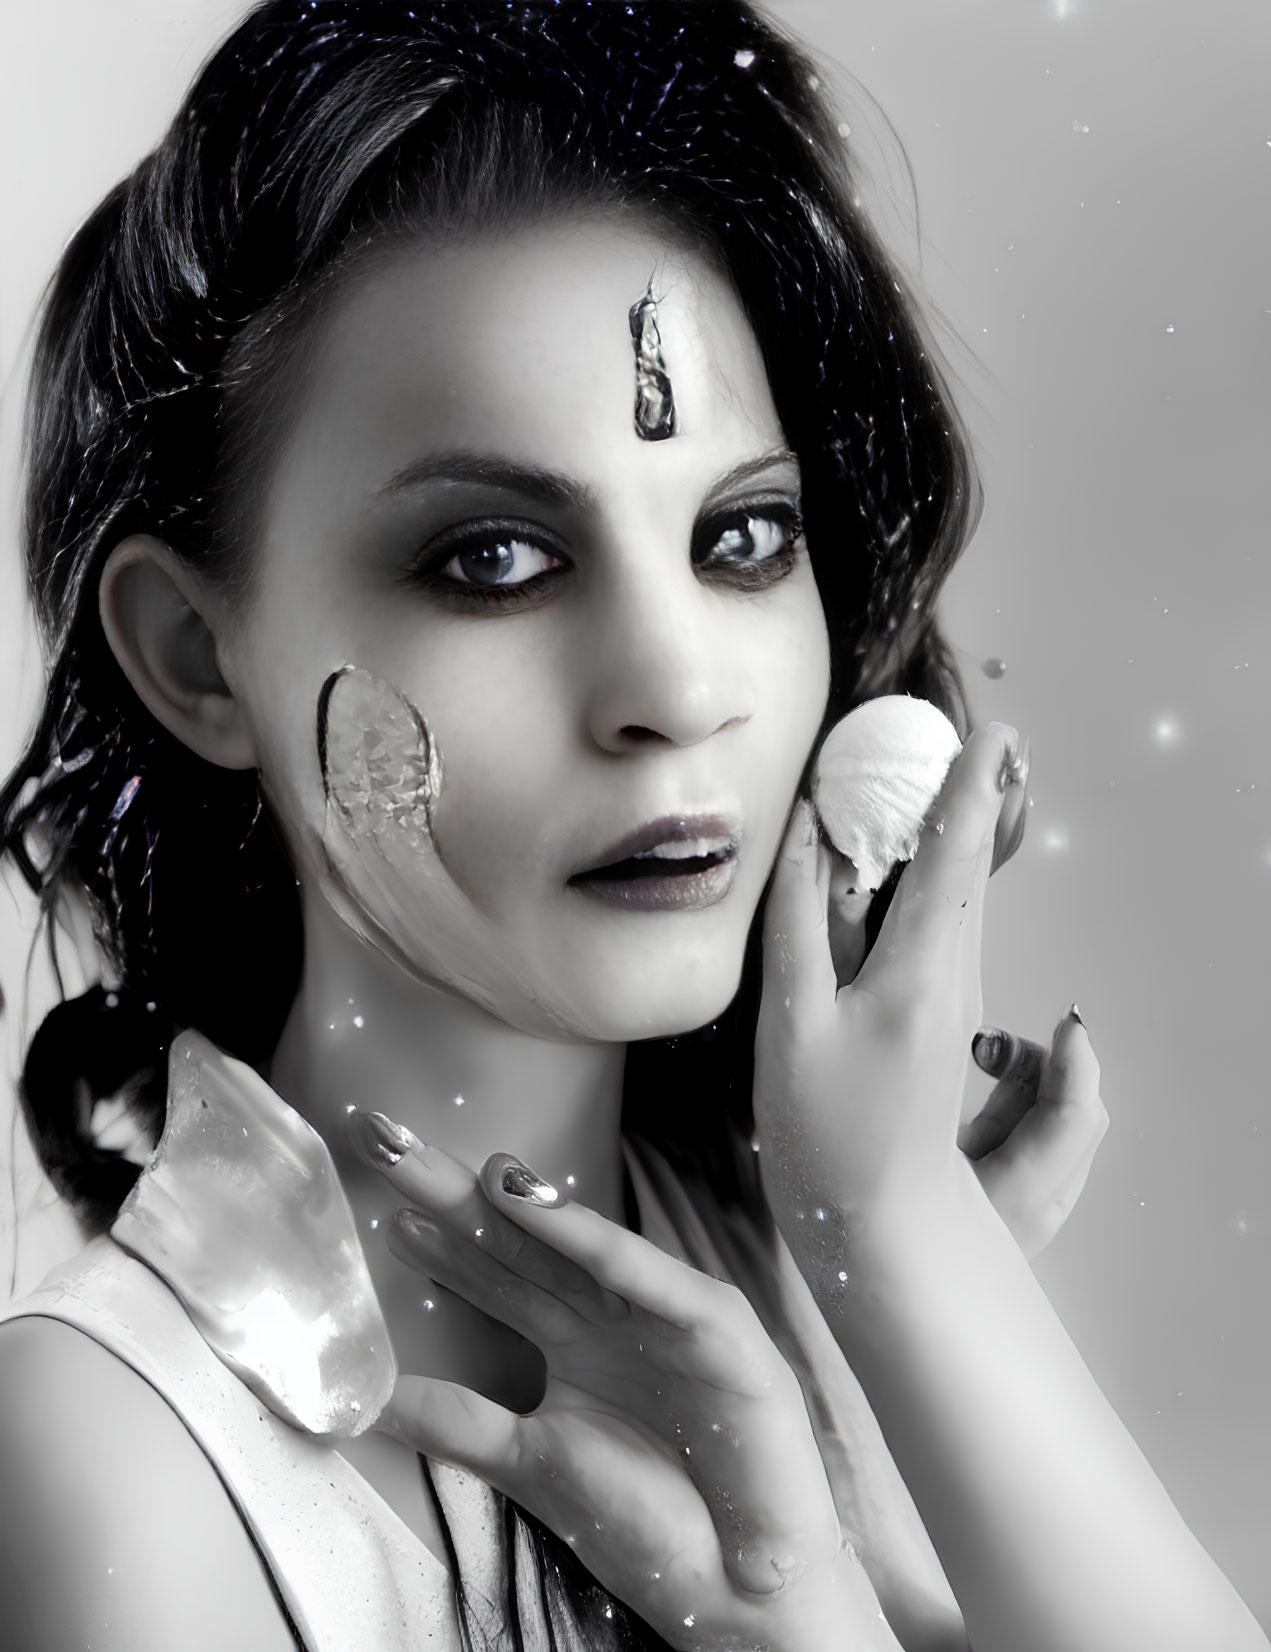 Monochromatic portrait of woman with dramatic makeup holding seashell